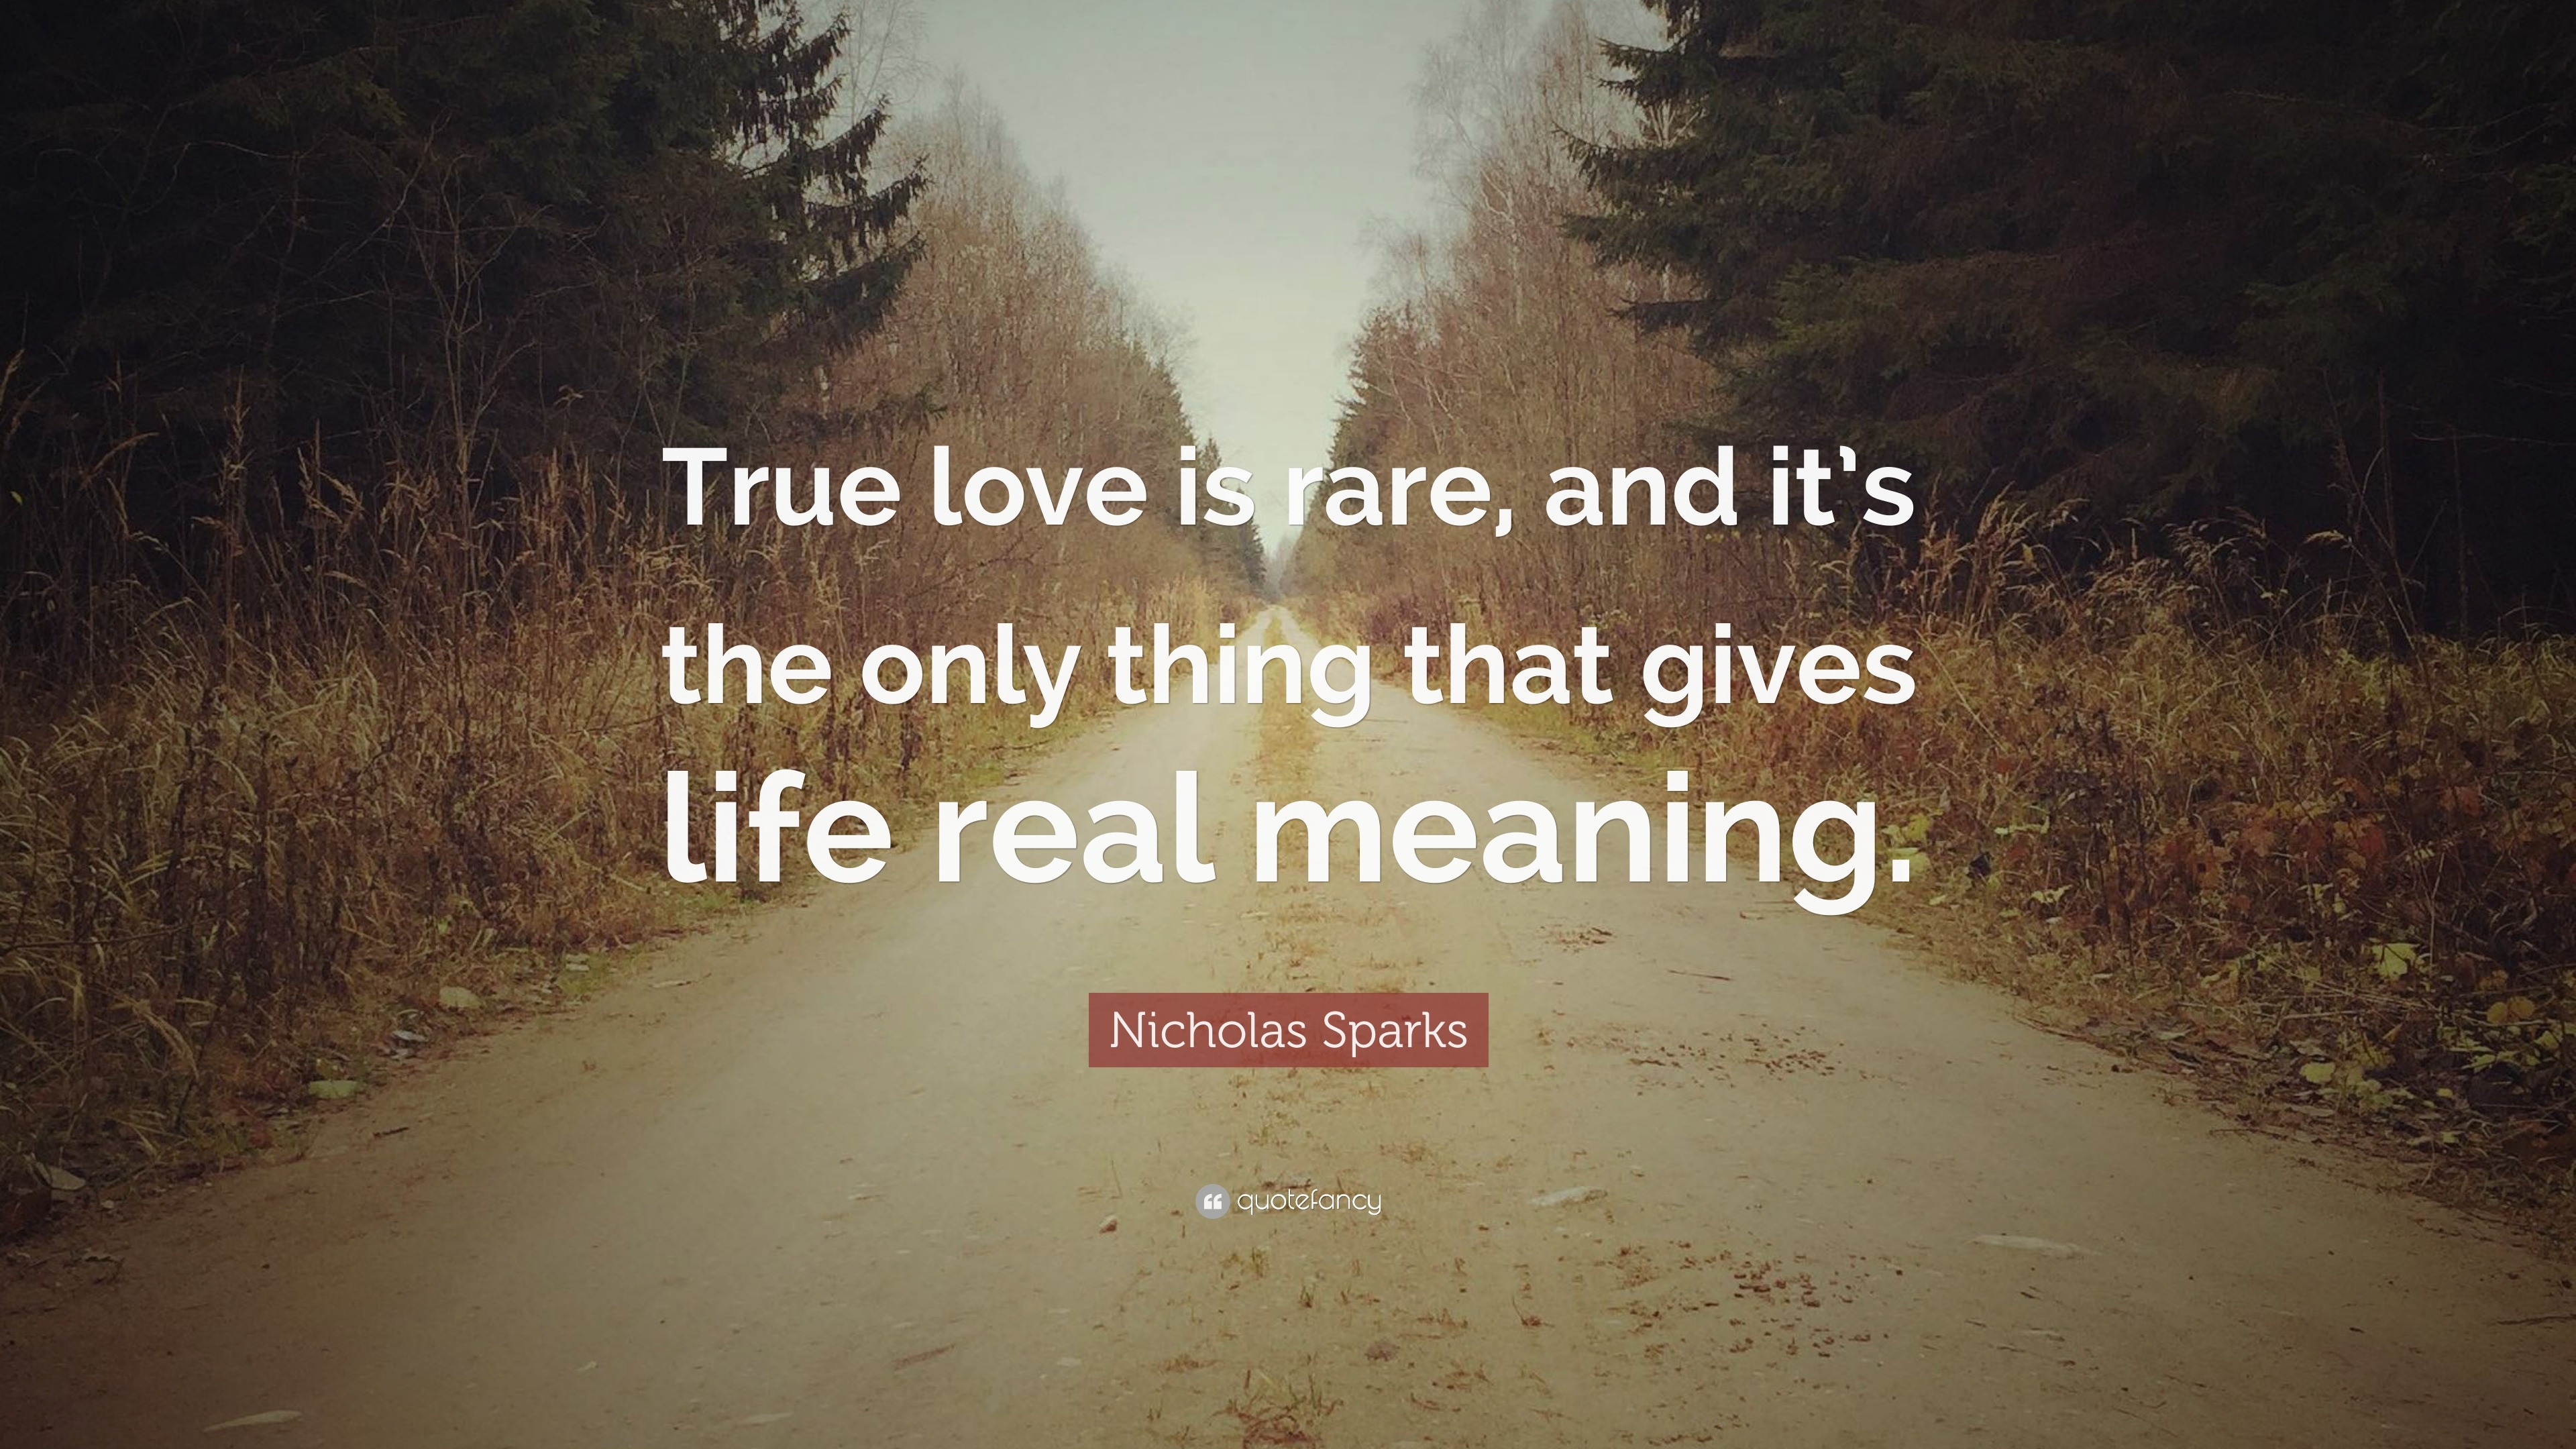 Nicholas Sparks Quote “True love is rare and it s the only thing that